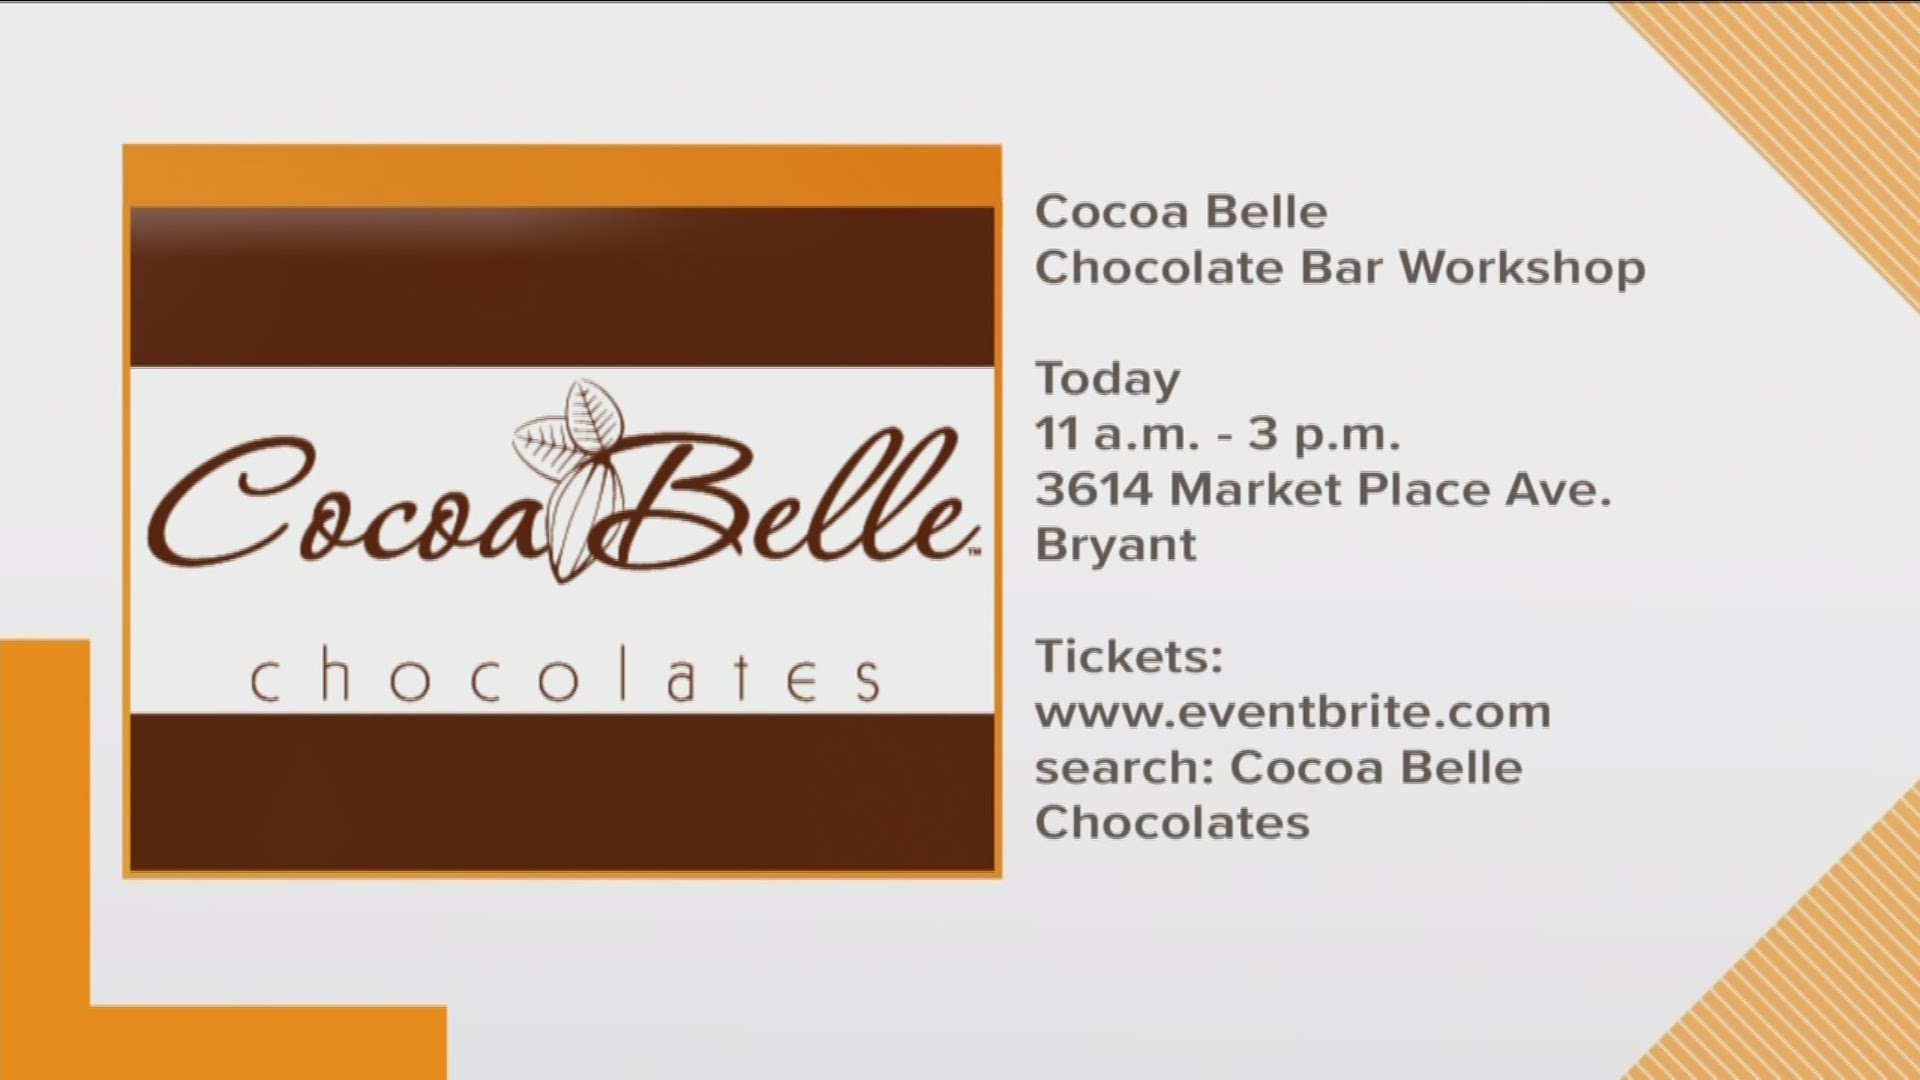 Carmen Portillo from Cocoa Belle Chocolates is here to tell us about their chocolate bar workshop.